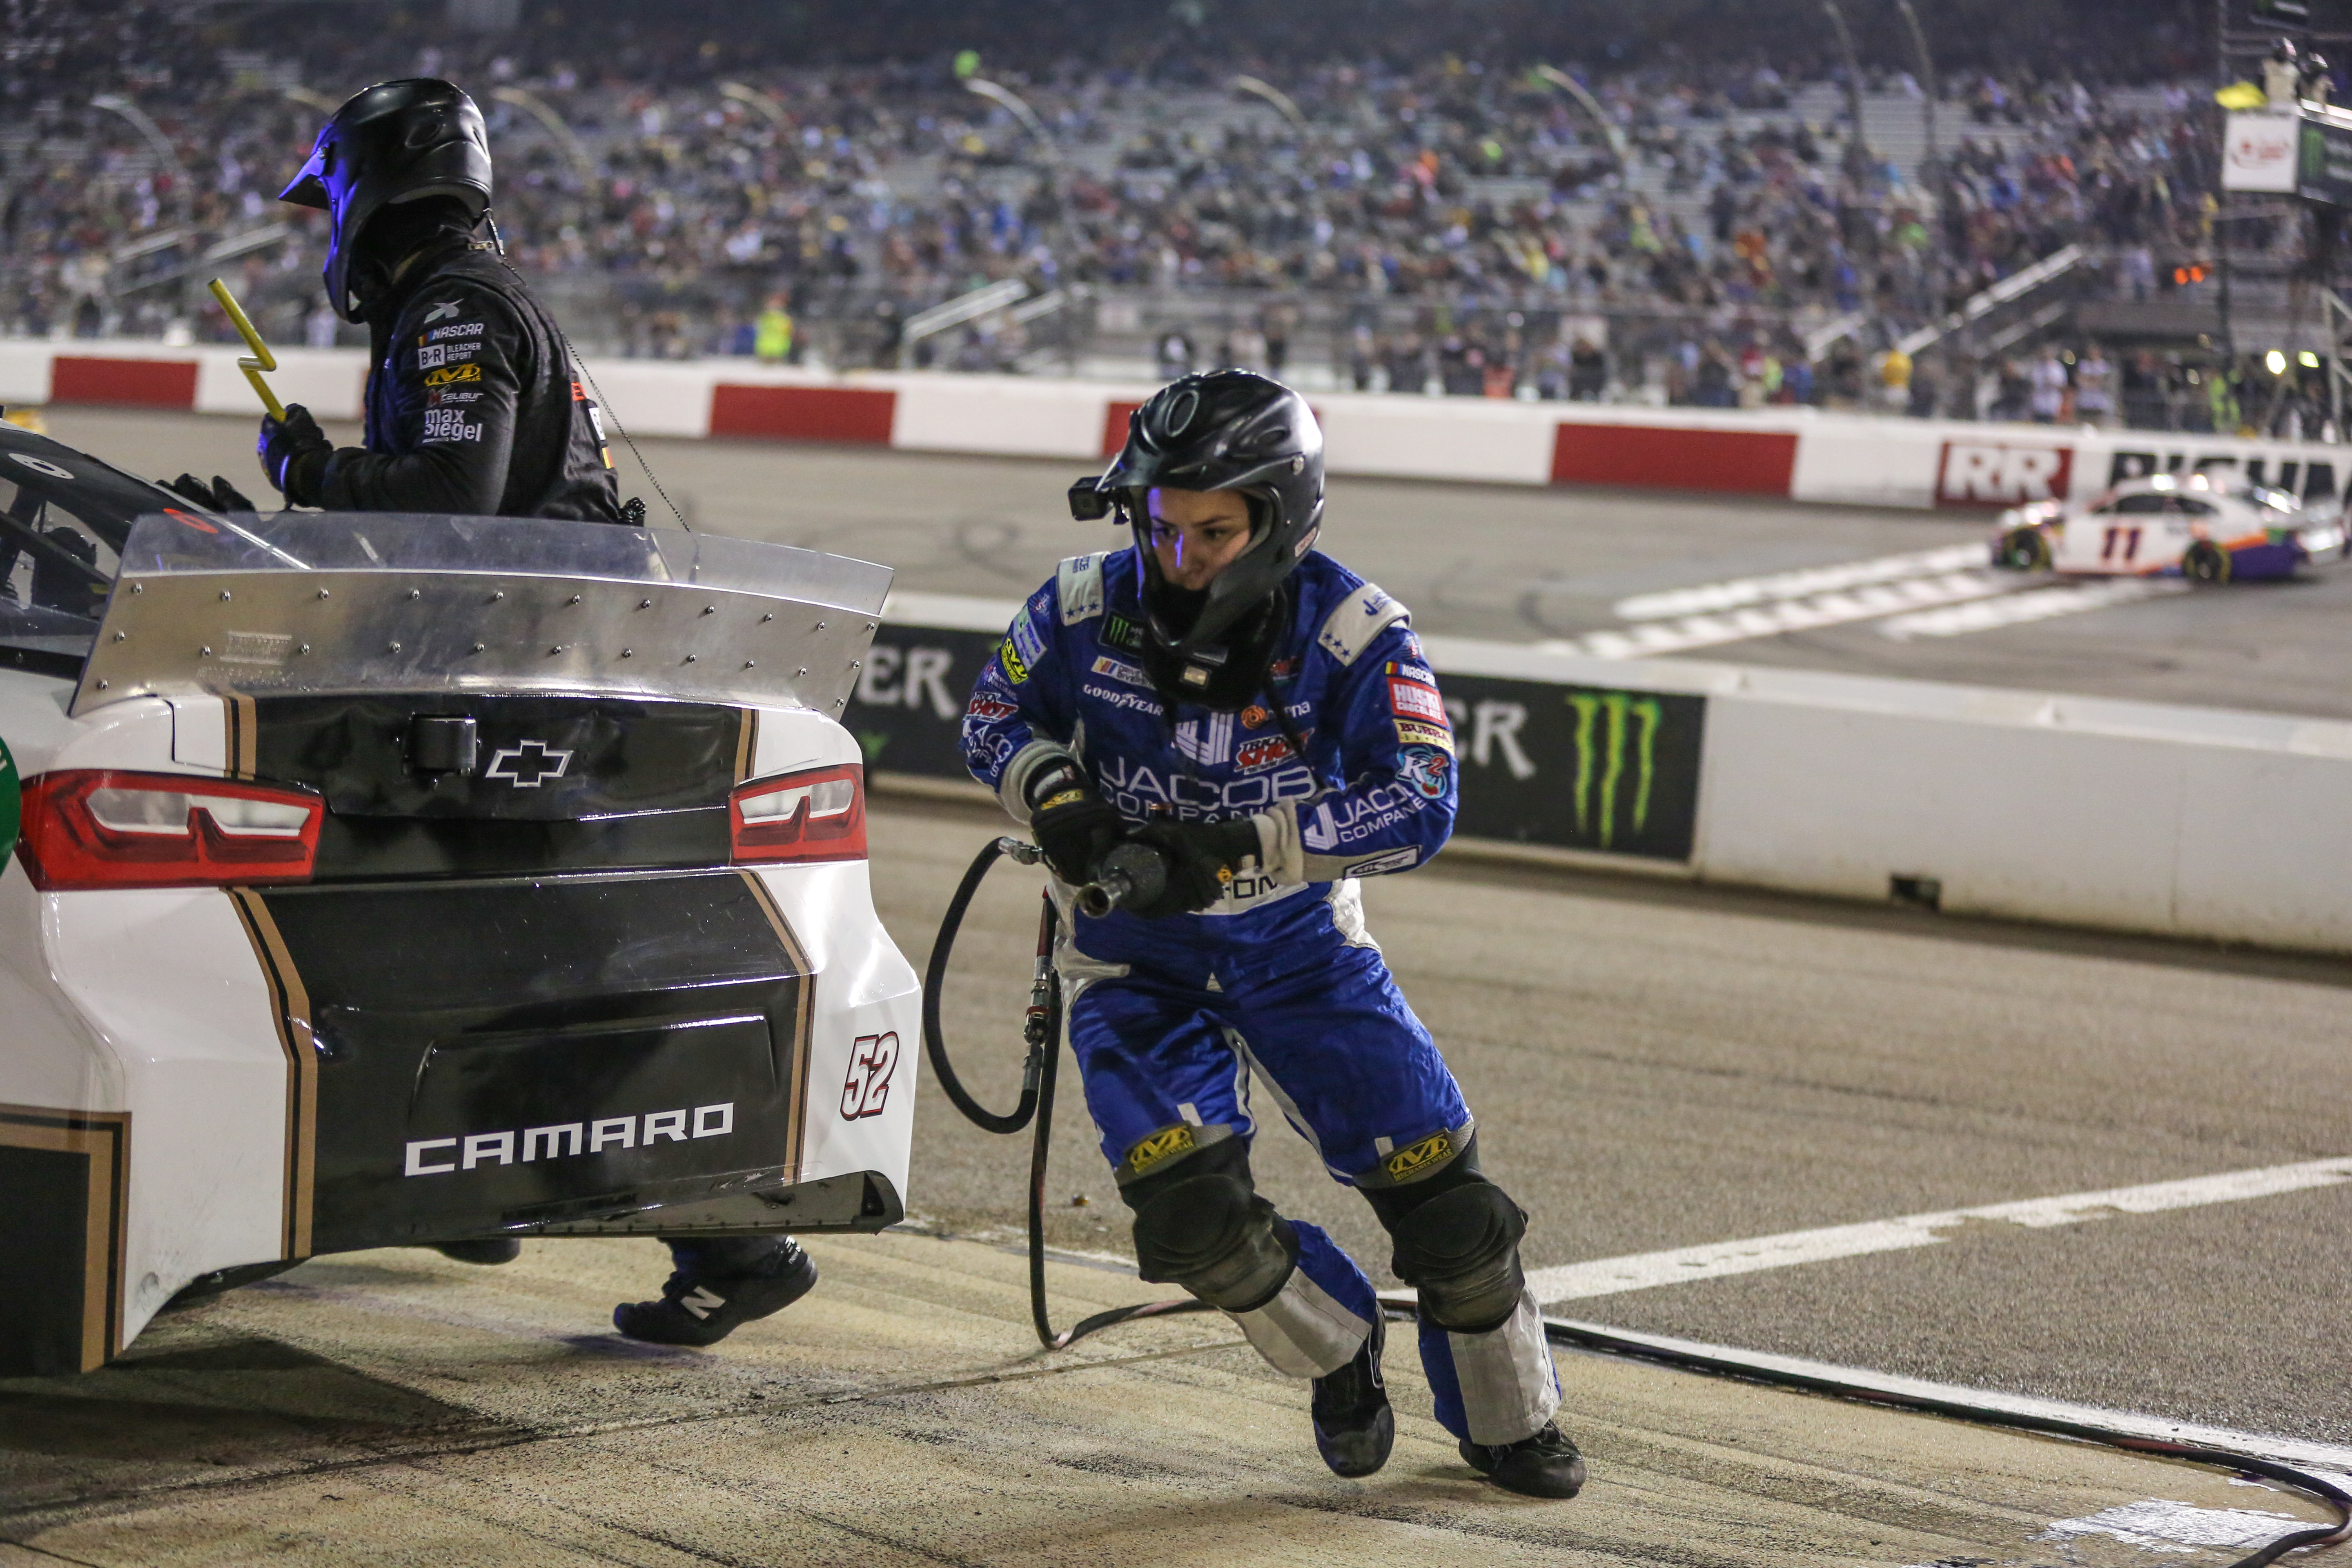 Unwavering, O'Leary bolts her way in this pit stop at Richmond. (Photo Credit: Jonathan Huff/TPF)